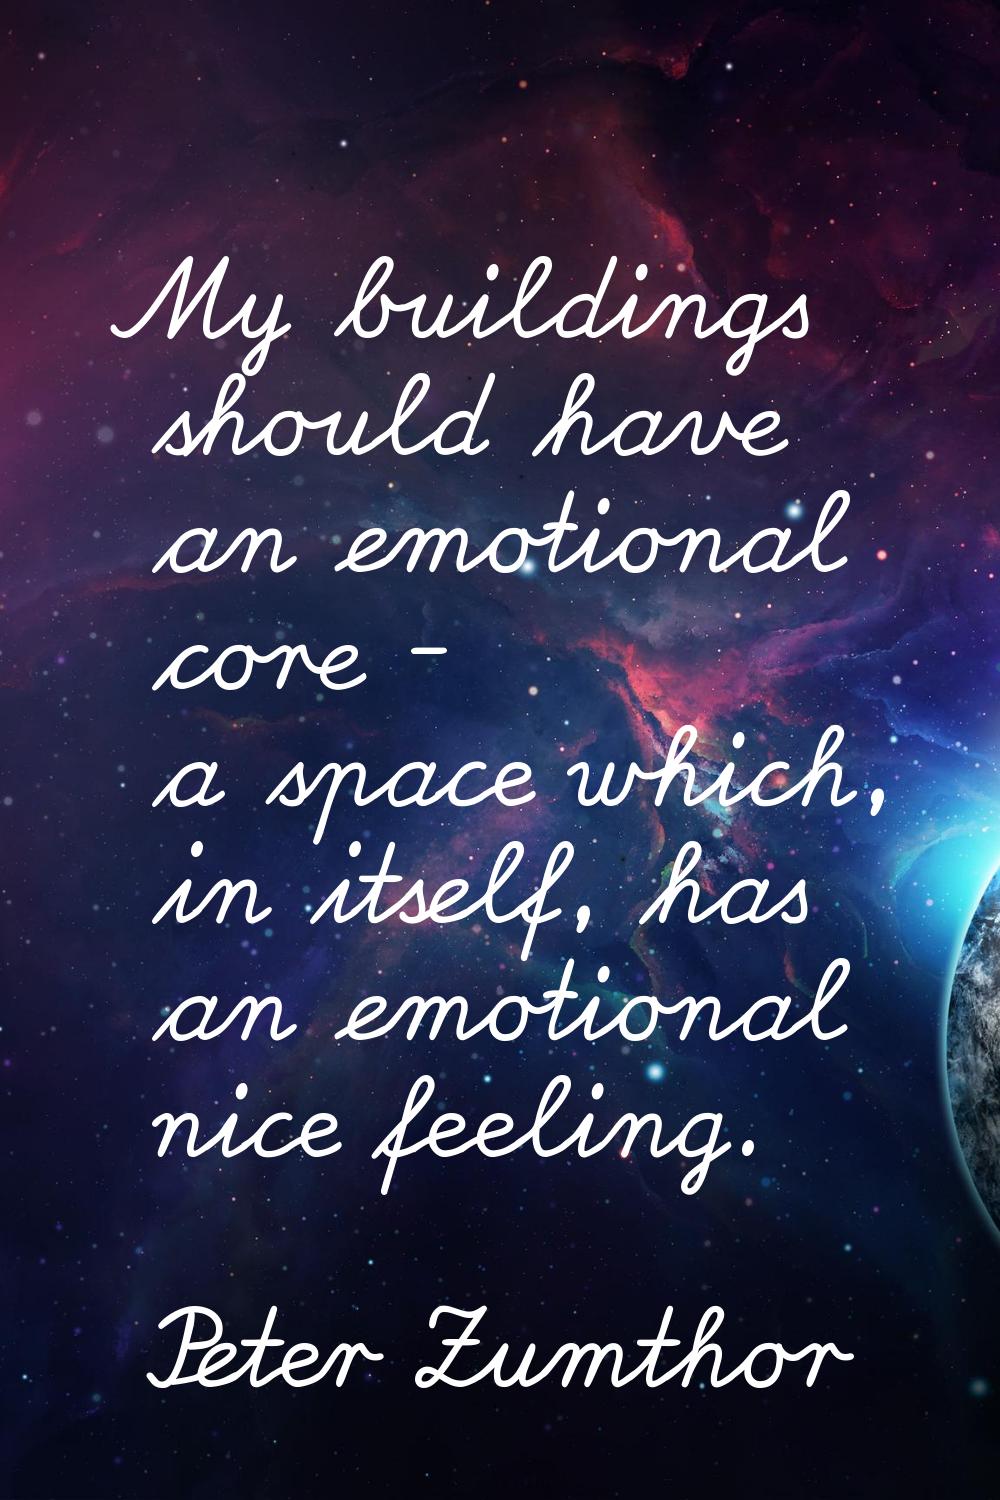 My buildings should have an emotional core - a space which, in itself, has an emotional nice feelin